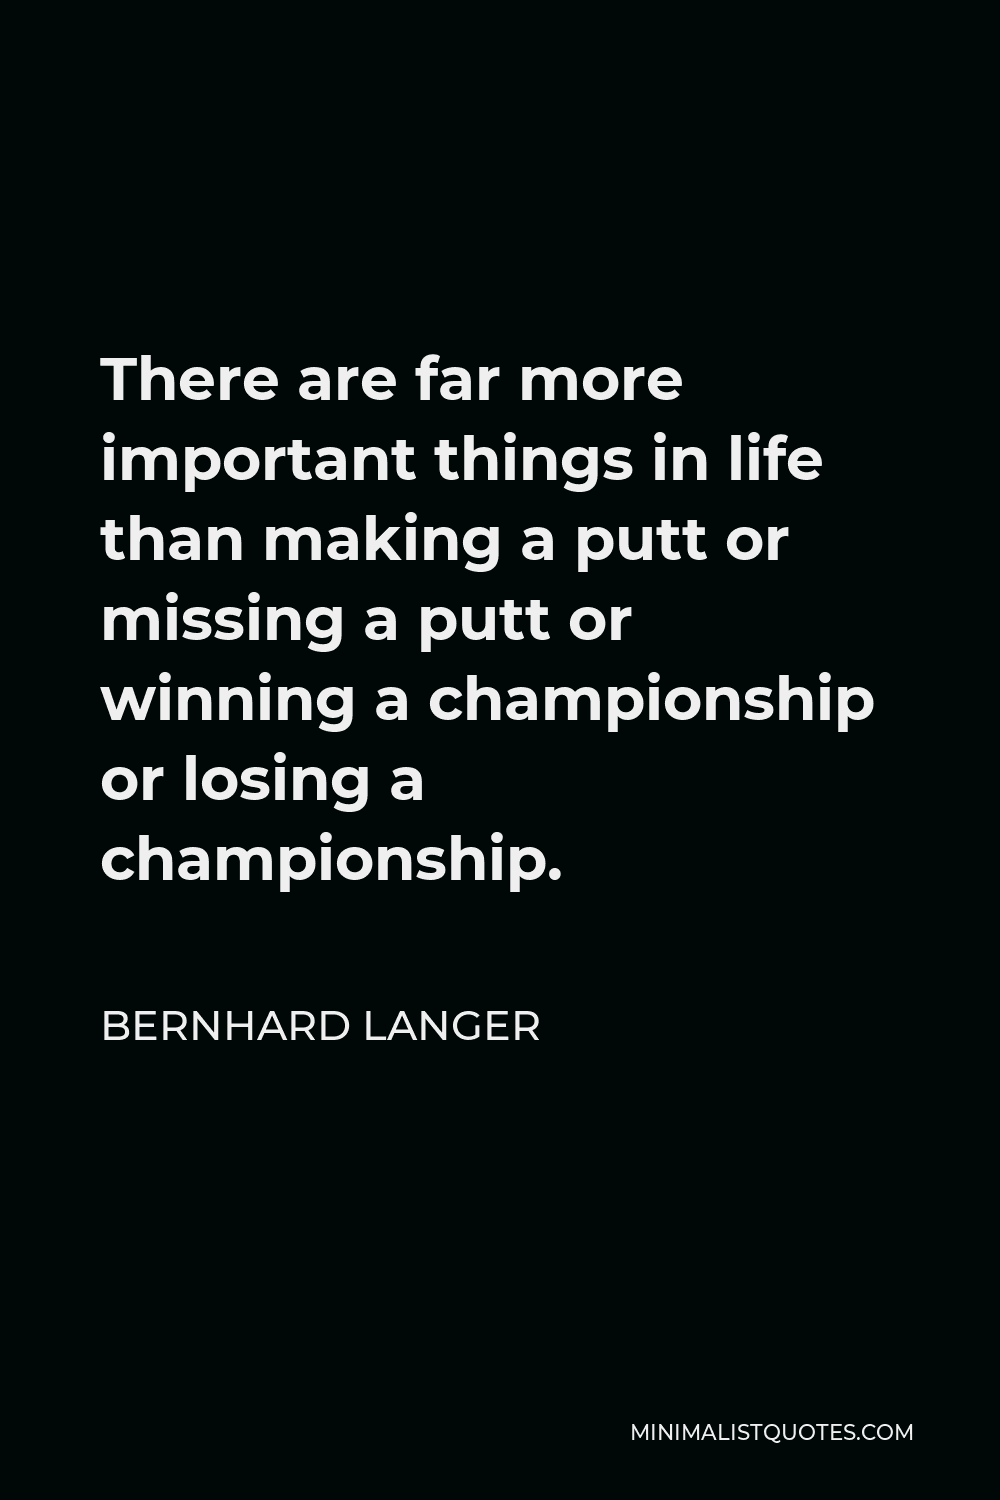 Bernhard Langer Quote - There are far more important things in life than making a putt or missing a putt or winning a championship or losing a championship.